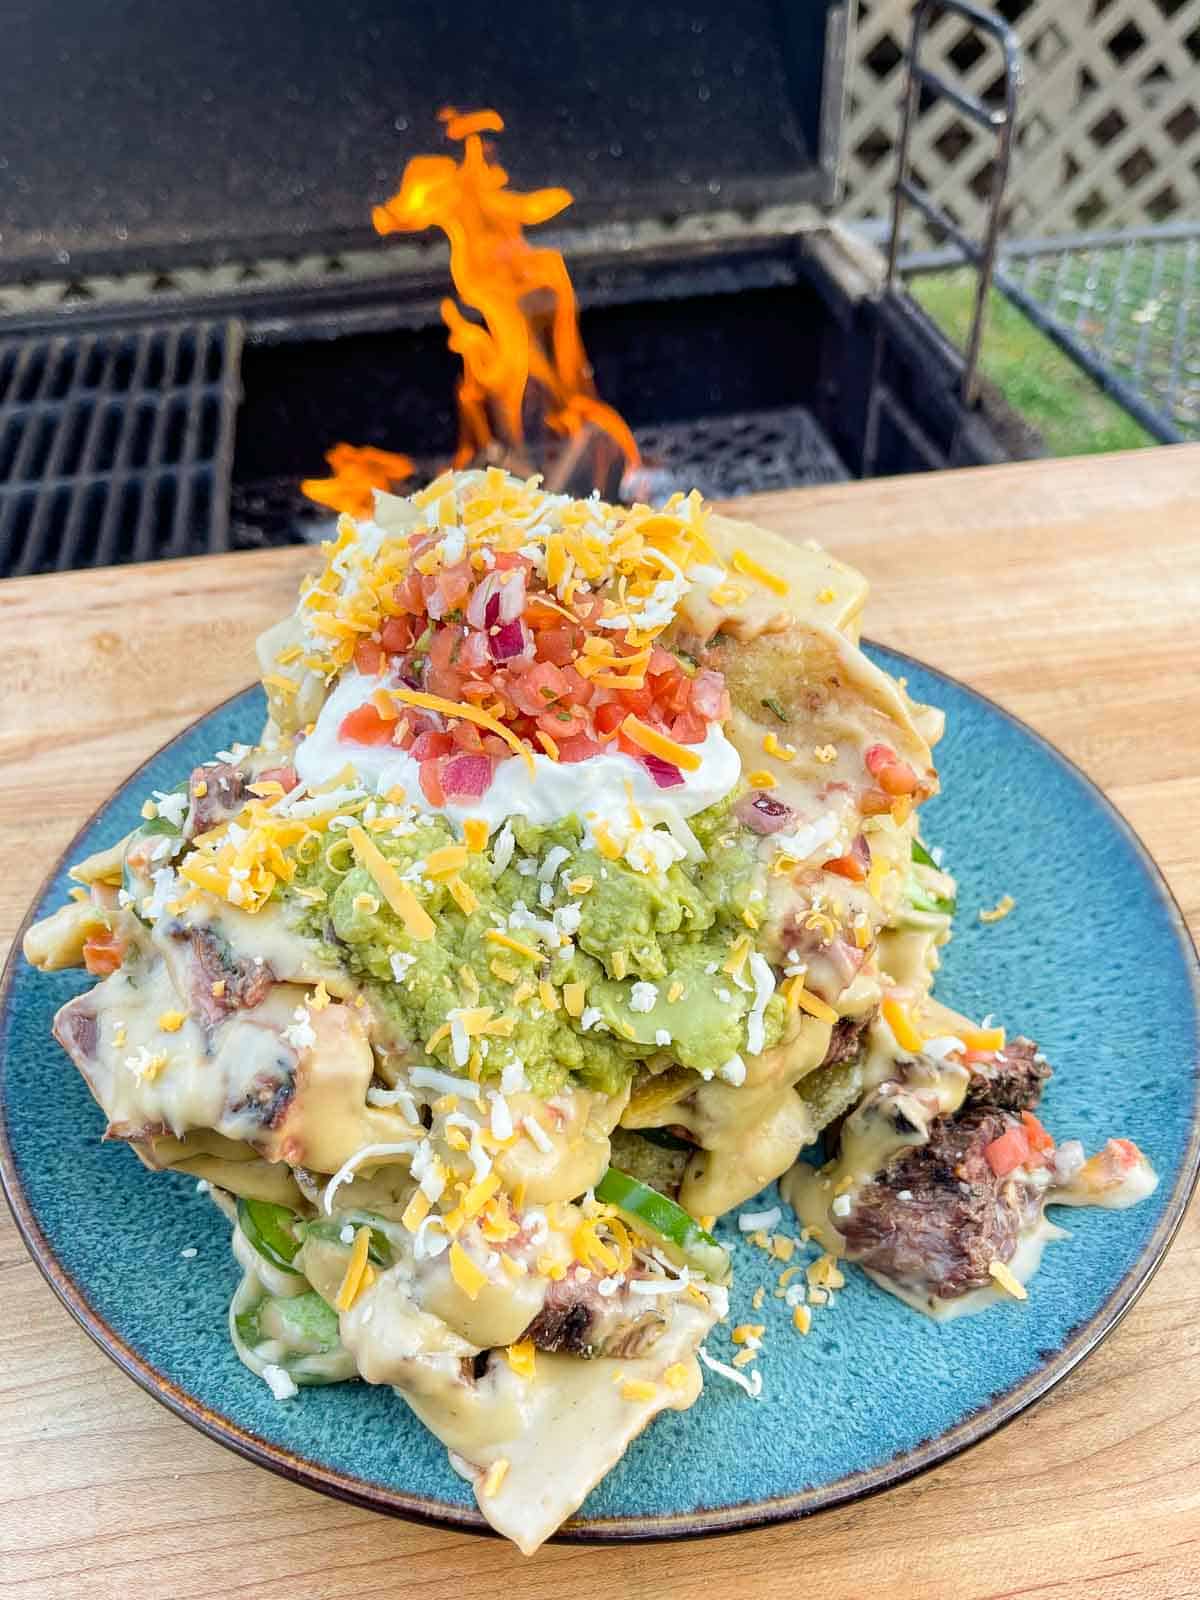 The Grilled Trash Can Nachos assembled and served. 